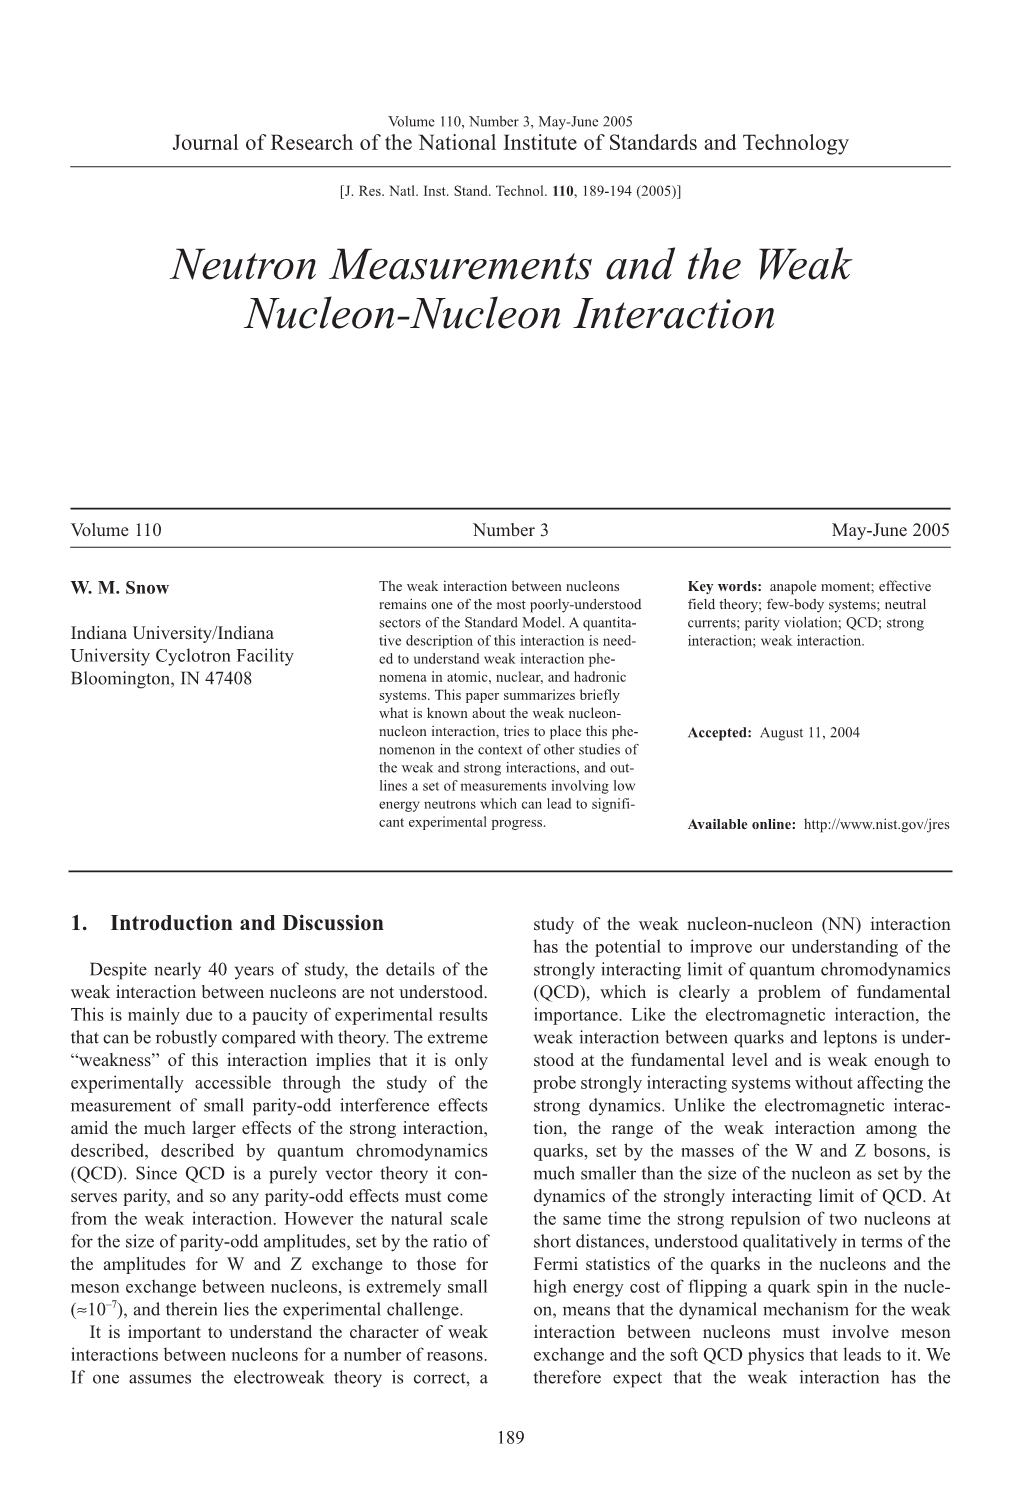 Neutron Measurements and the Weak Nucleon-Nucleon Interaction